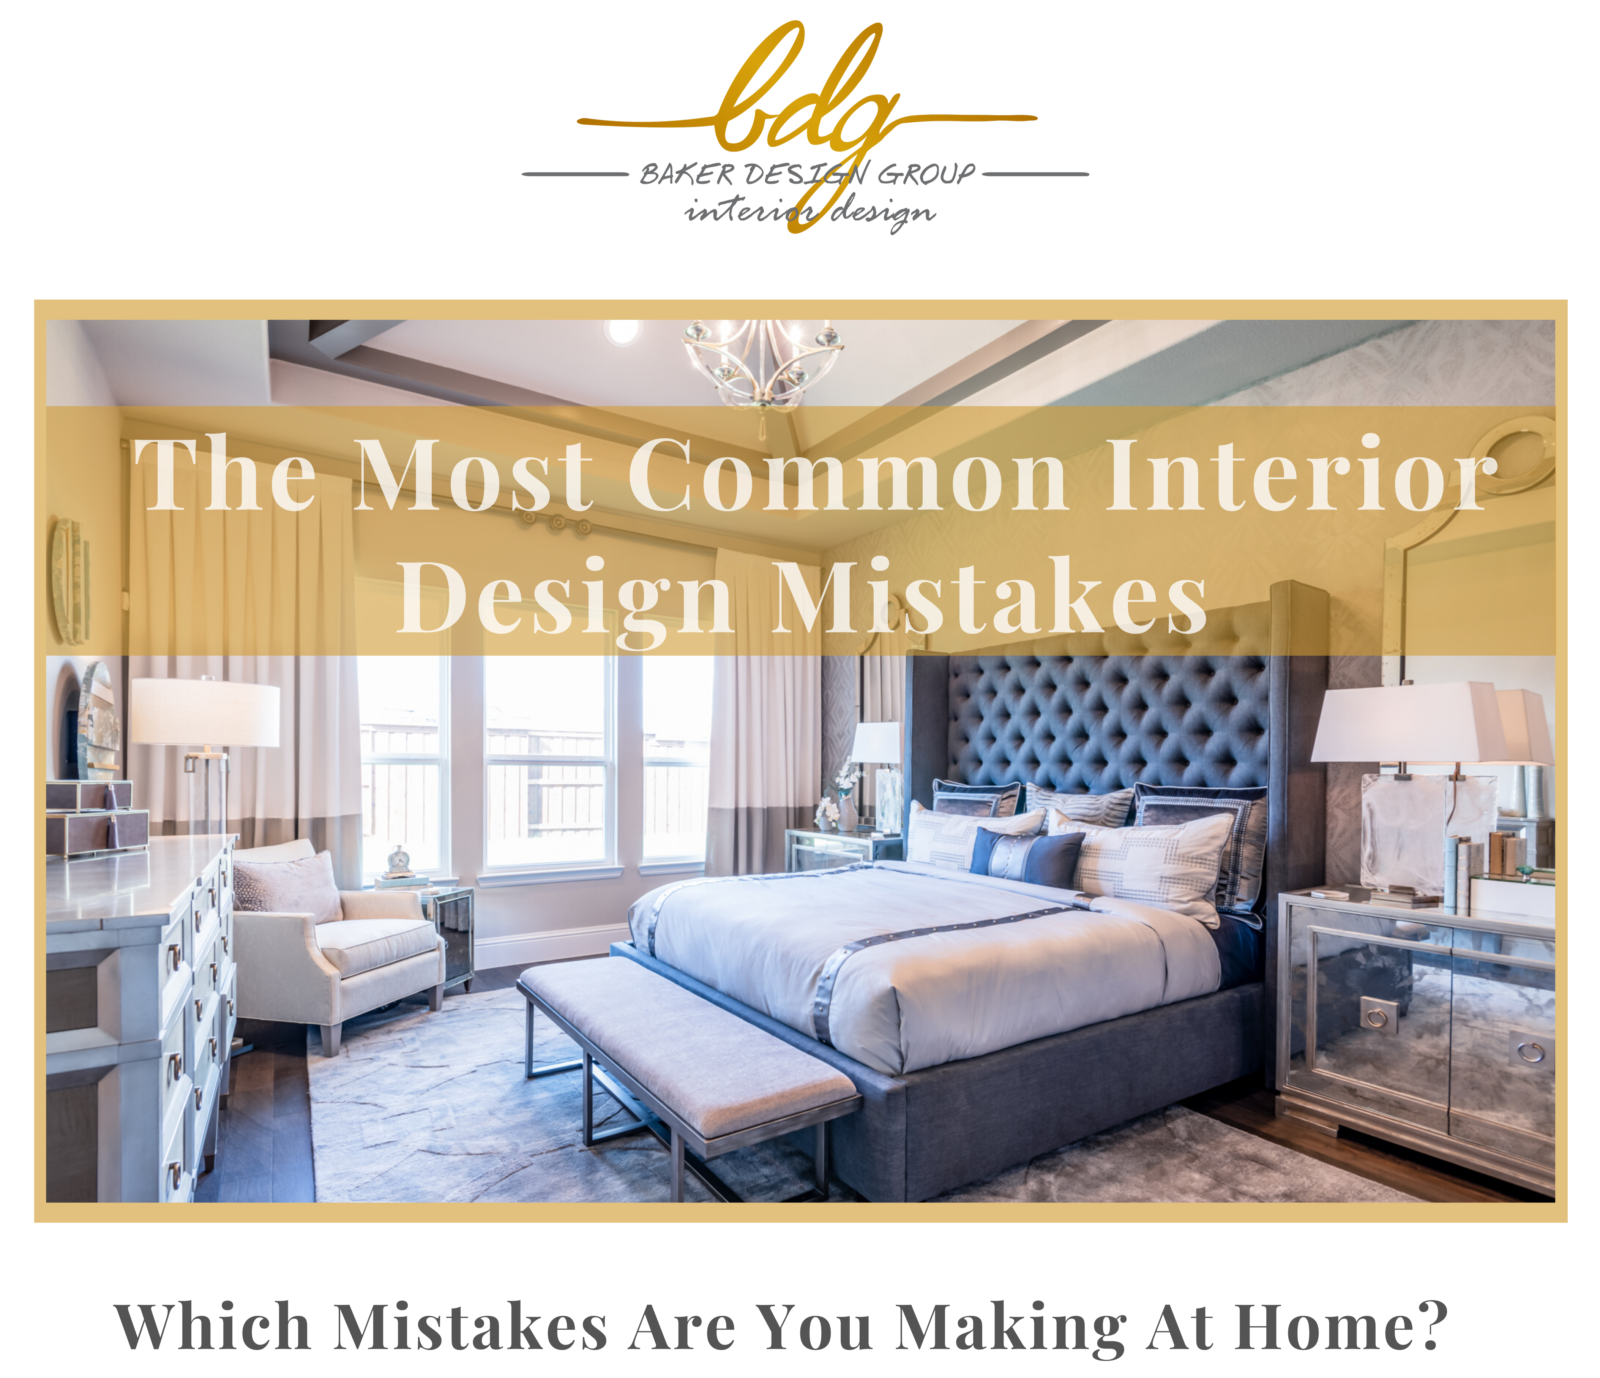 Baker Design Group - The Most Common Interior Design Mistakes